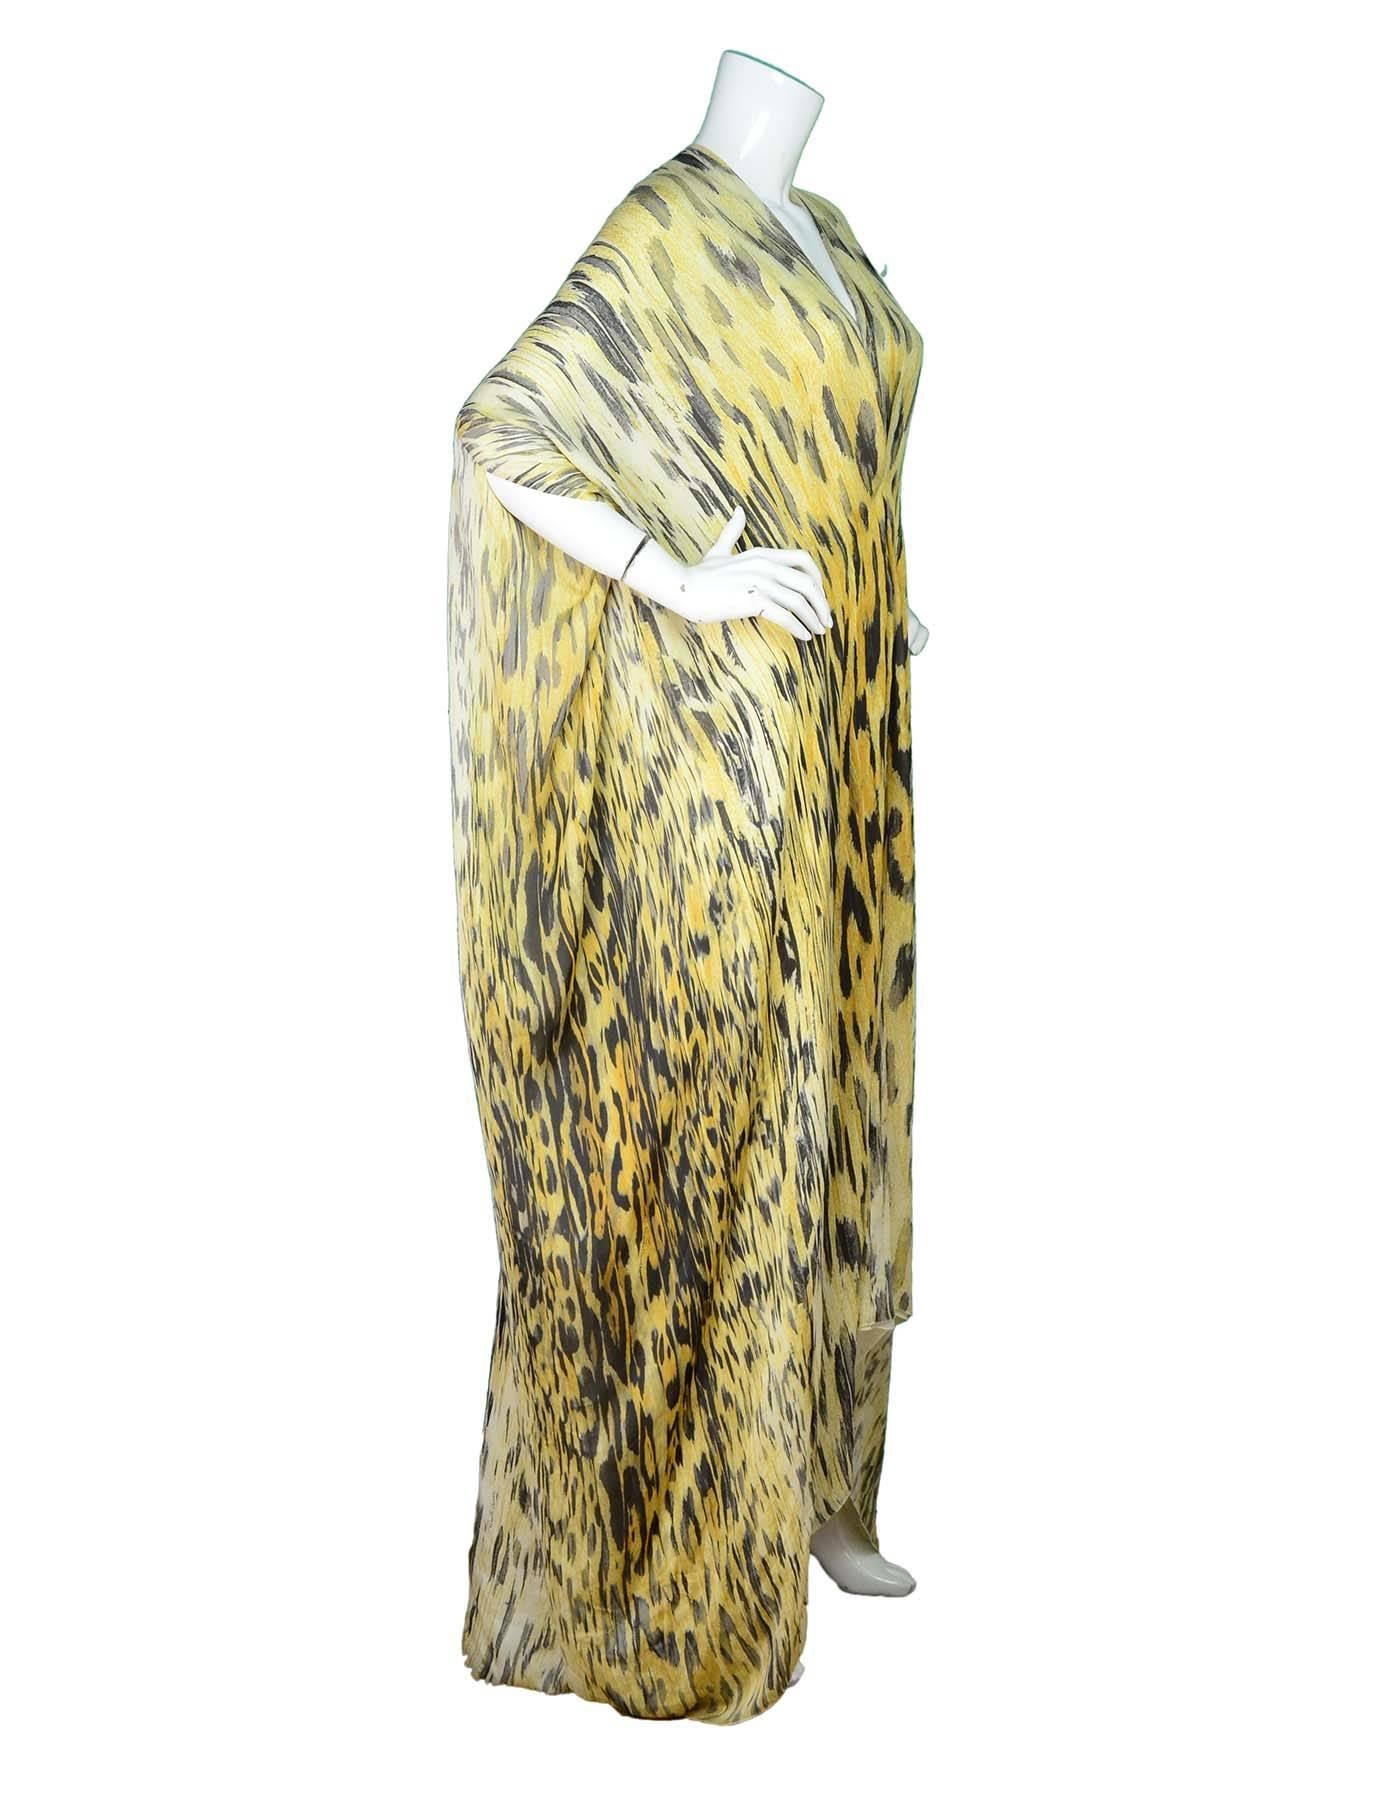 Roberto Cavalli Silk Leopard Georgette Kaftan Sz S
Features keyholes at back and high-low hem

Made In: Italy
Year Of Production: 2011
Color: Black, yellow
Composition: 100%Silk
Lining: Cream 100% Silk
Closure/Opening: Pull over
Overall